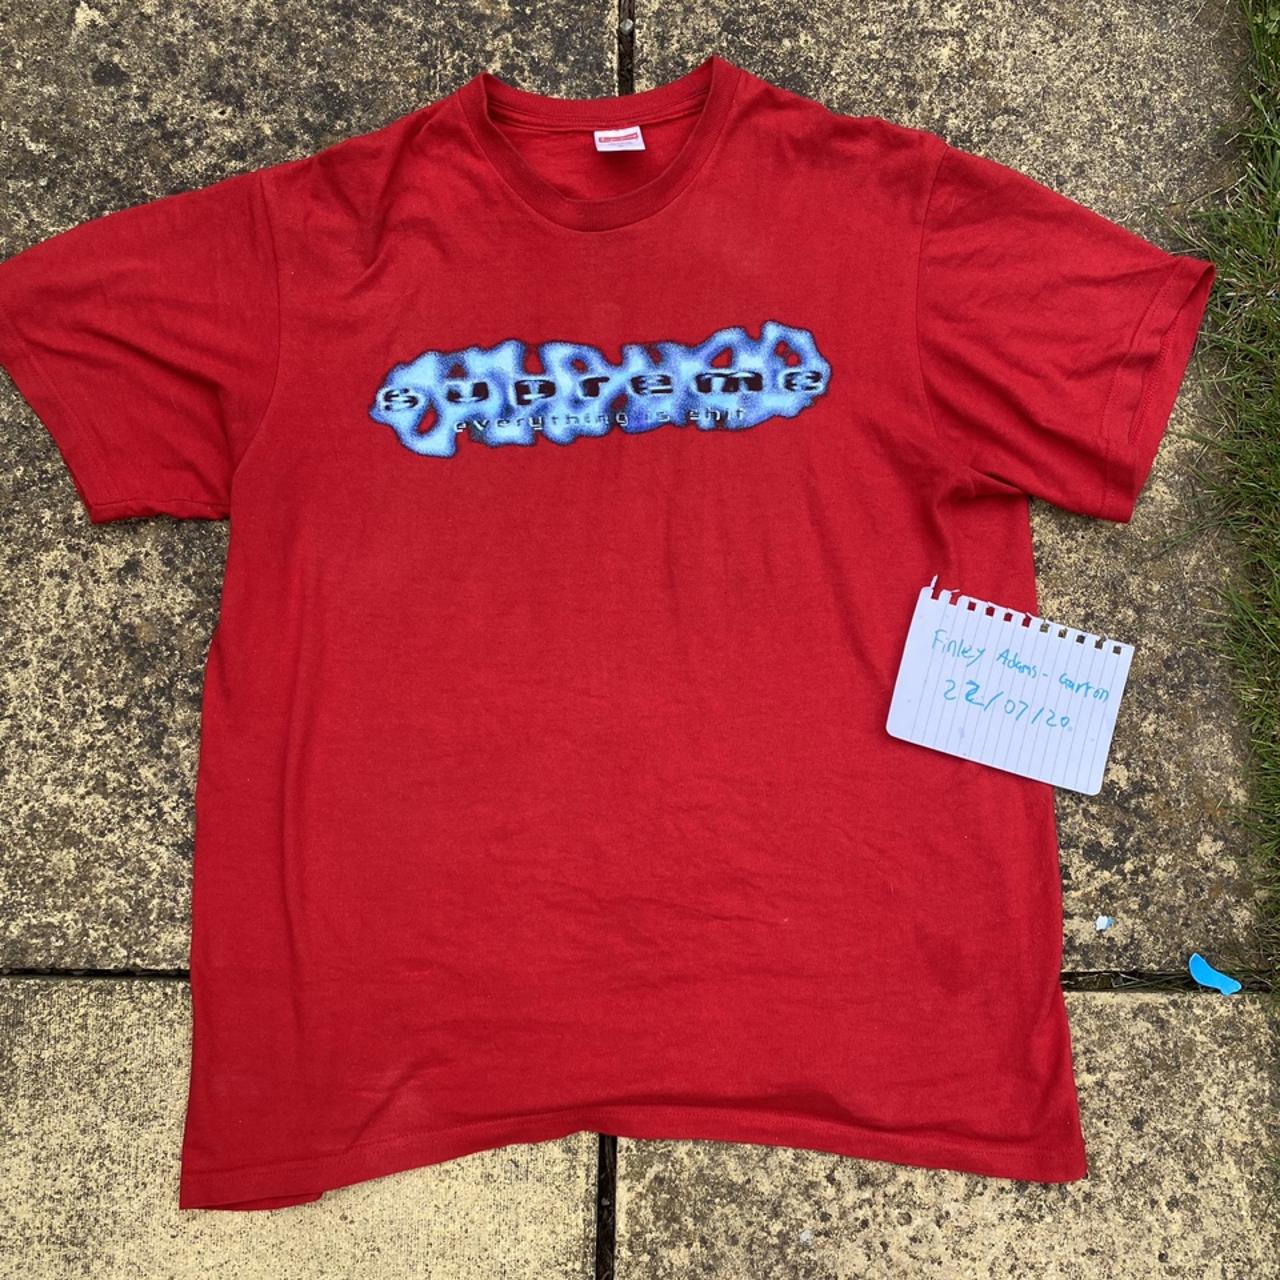 - Supreme everything is shit t-shirt, - size large...